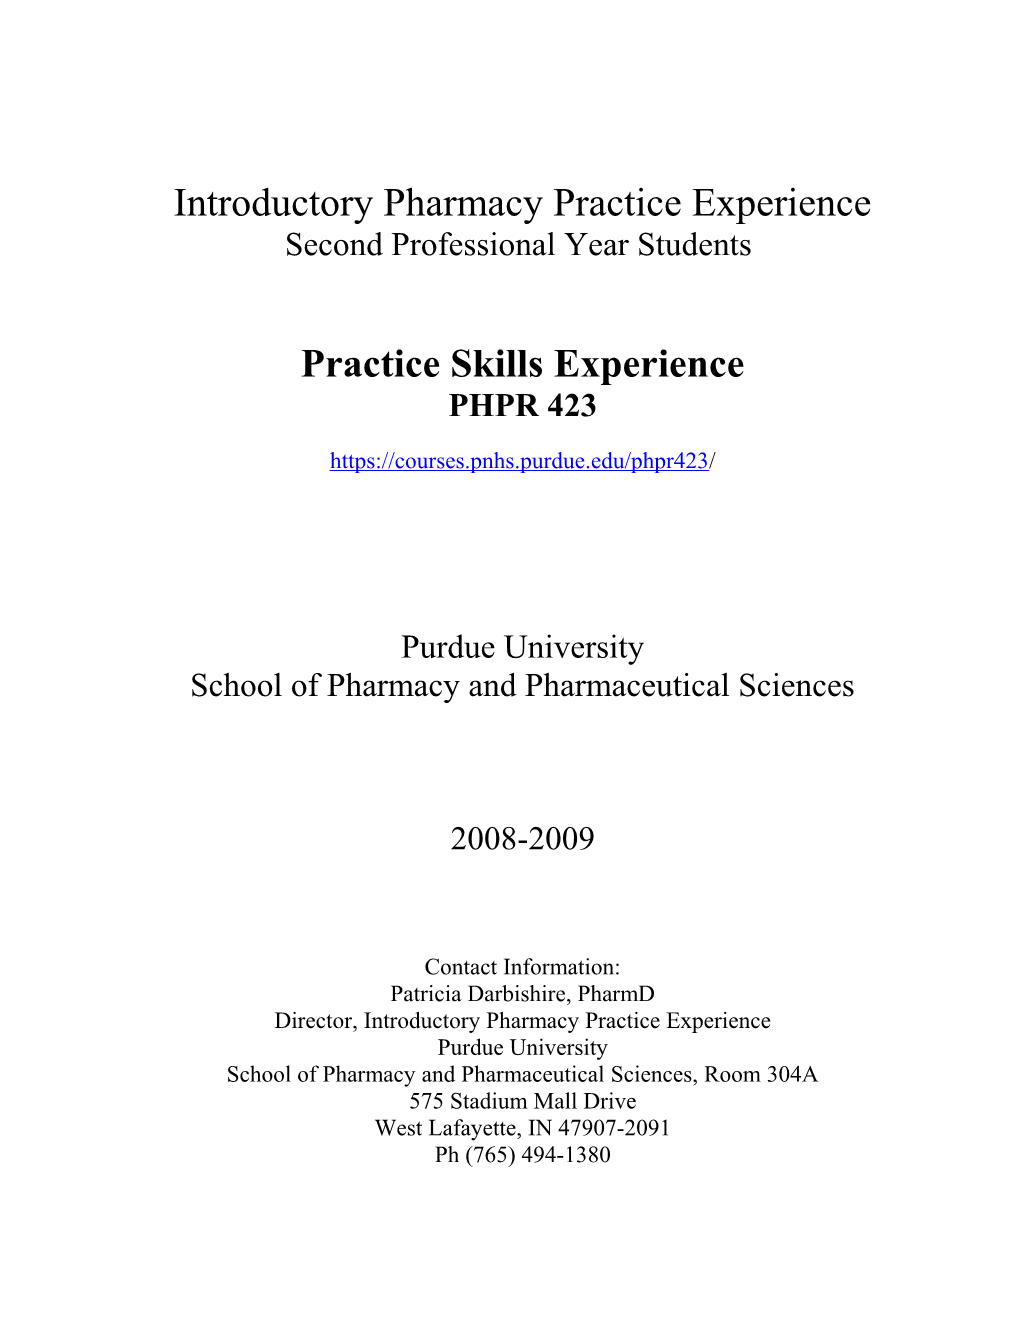 IPPE Guidebook for 1St Professional Year Pharmacy Students